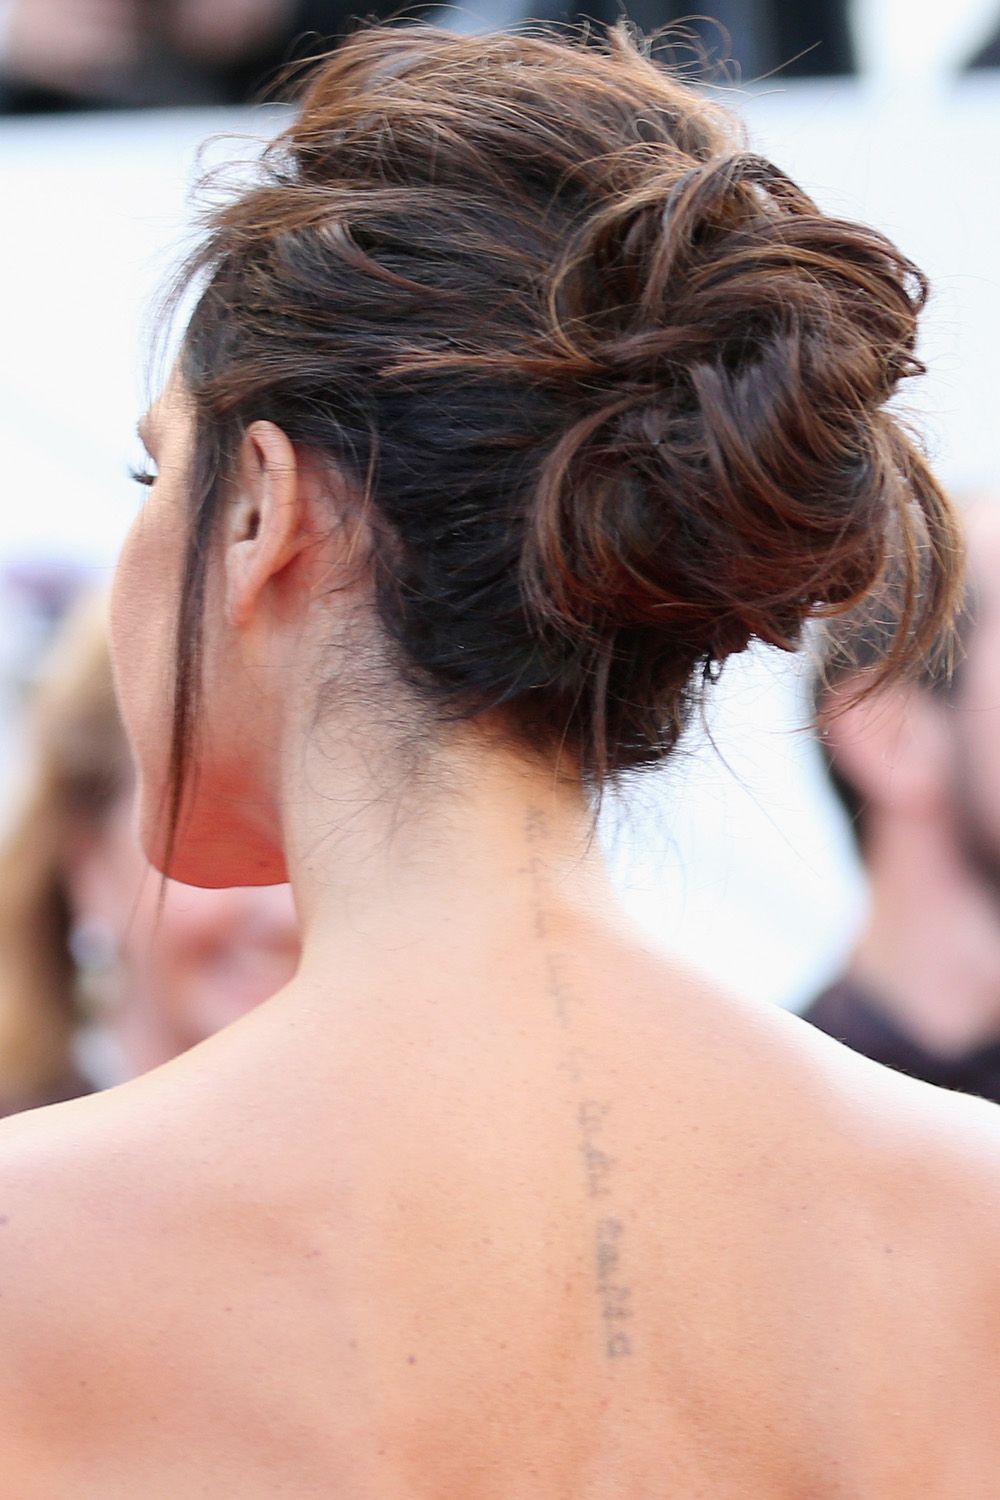 Best Messy Bun Hairstyle Ideas - Celebrity Messy Buns We Want to Copy